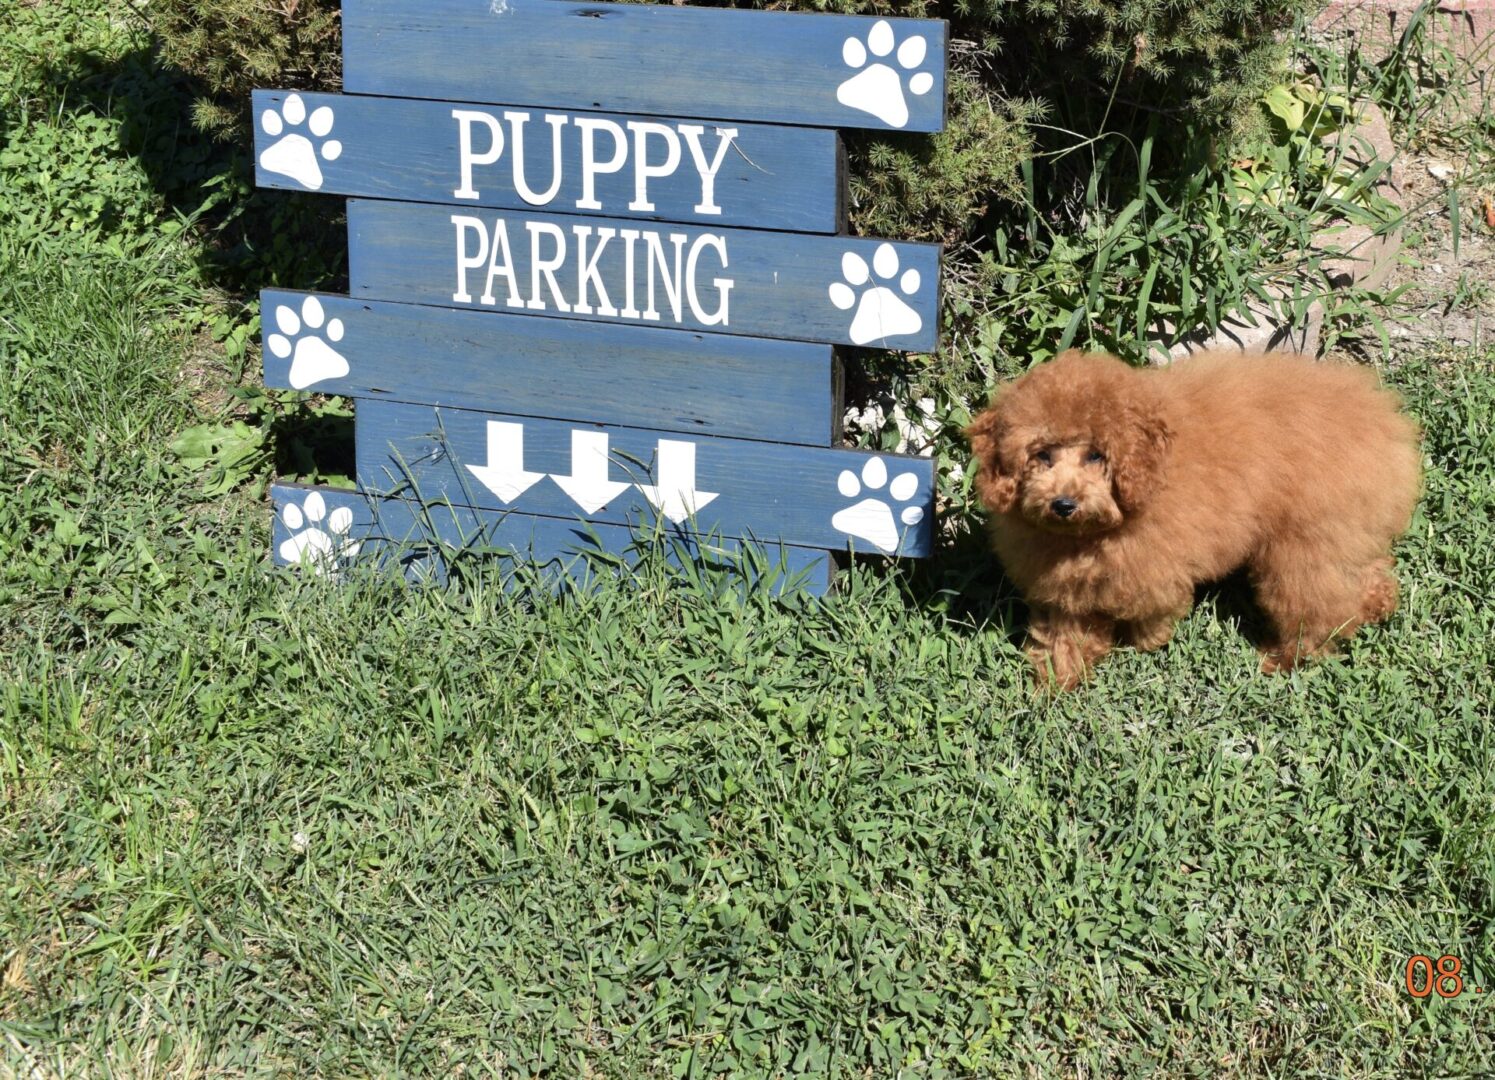 Puppy standing outside next to puppy parking sign